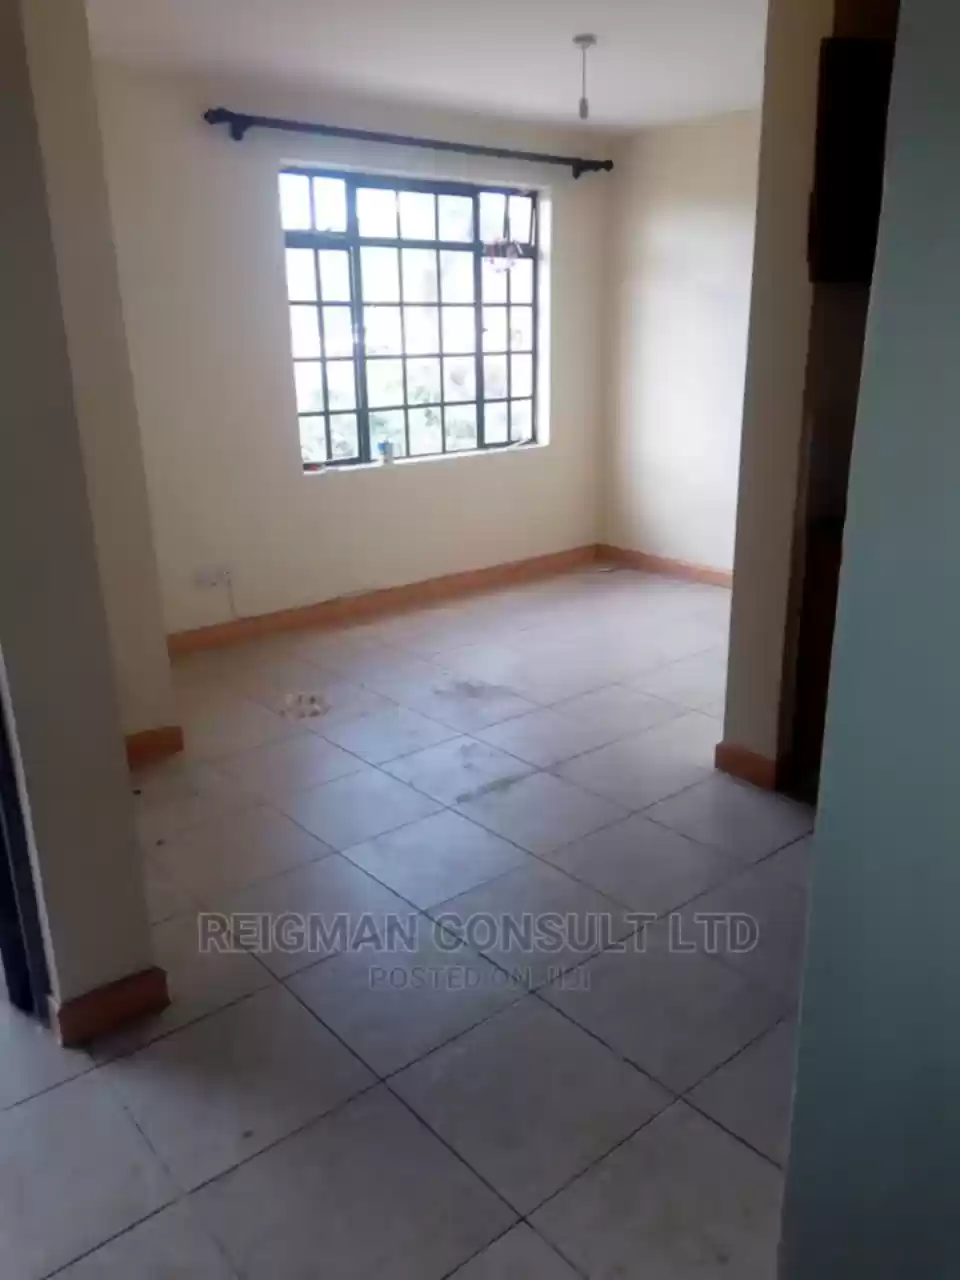 2 bedroom for rent in Mbagathi way, Near Riara University